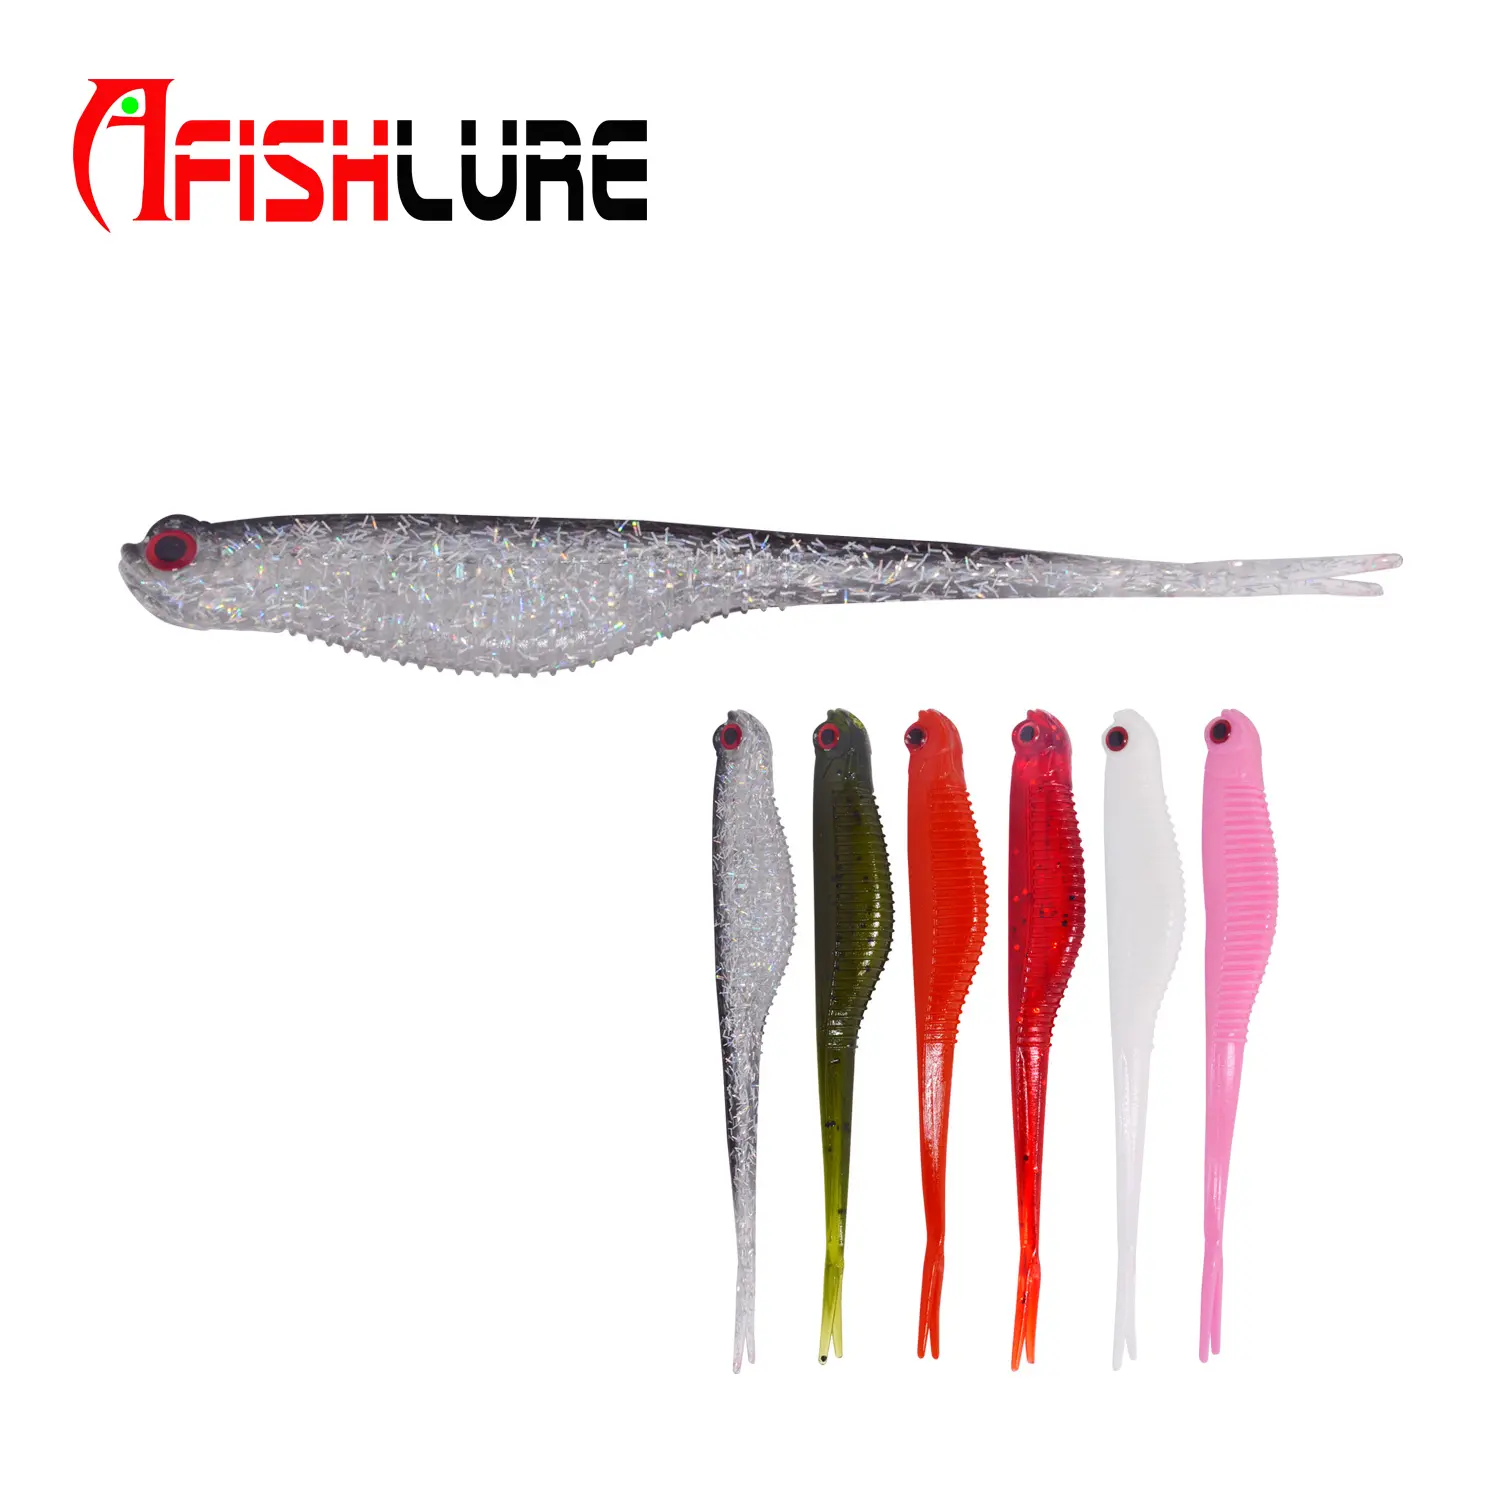 Fork Tail Soft Fish Bait 123mm 6.5g Y Tail Fishing Lure Carp Fishing Rubber Fish 3D Eyes Wobblers